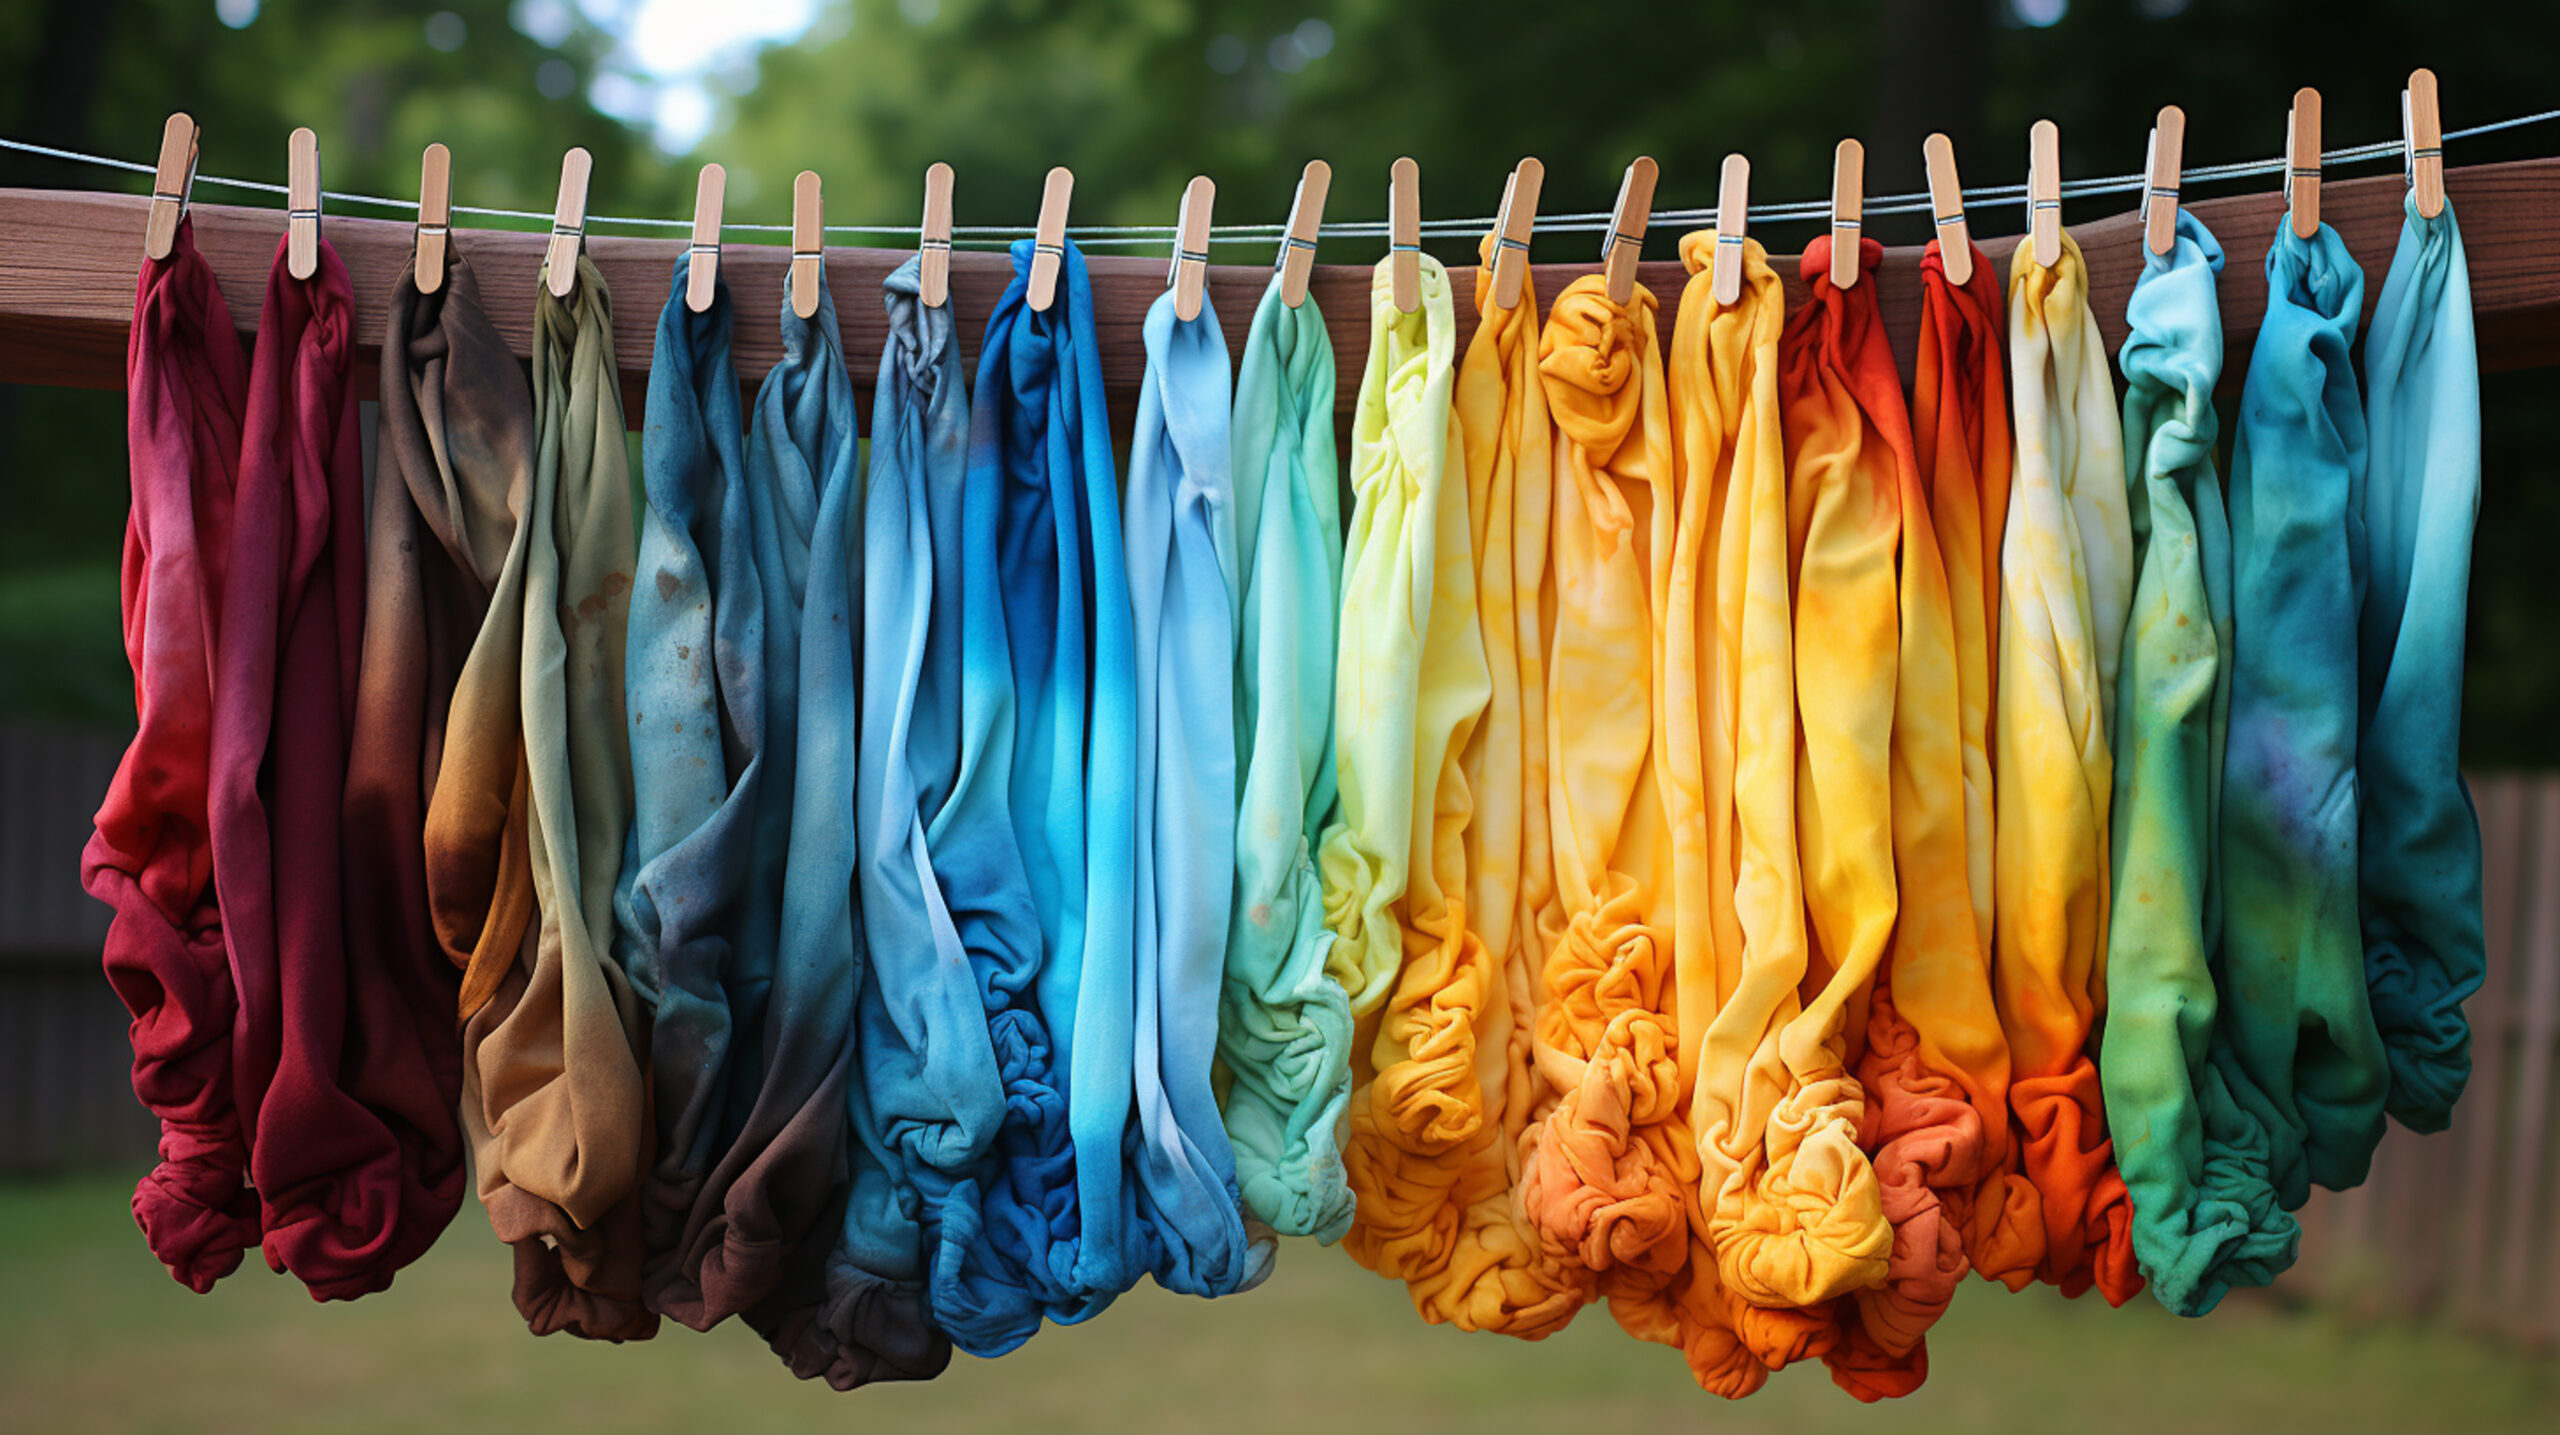 The Role of Dye Fixing Agents in Improving Colour Uniformity in Textiles​